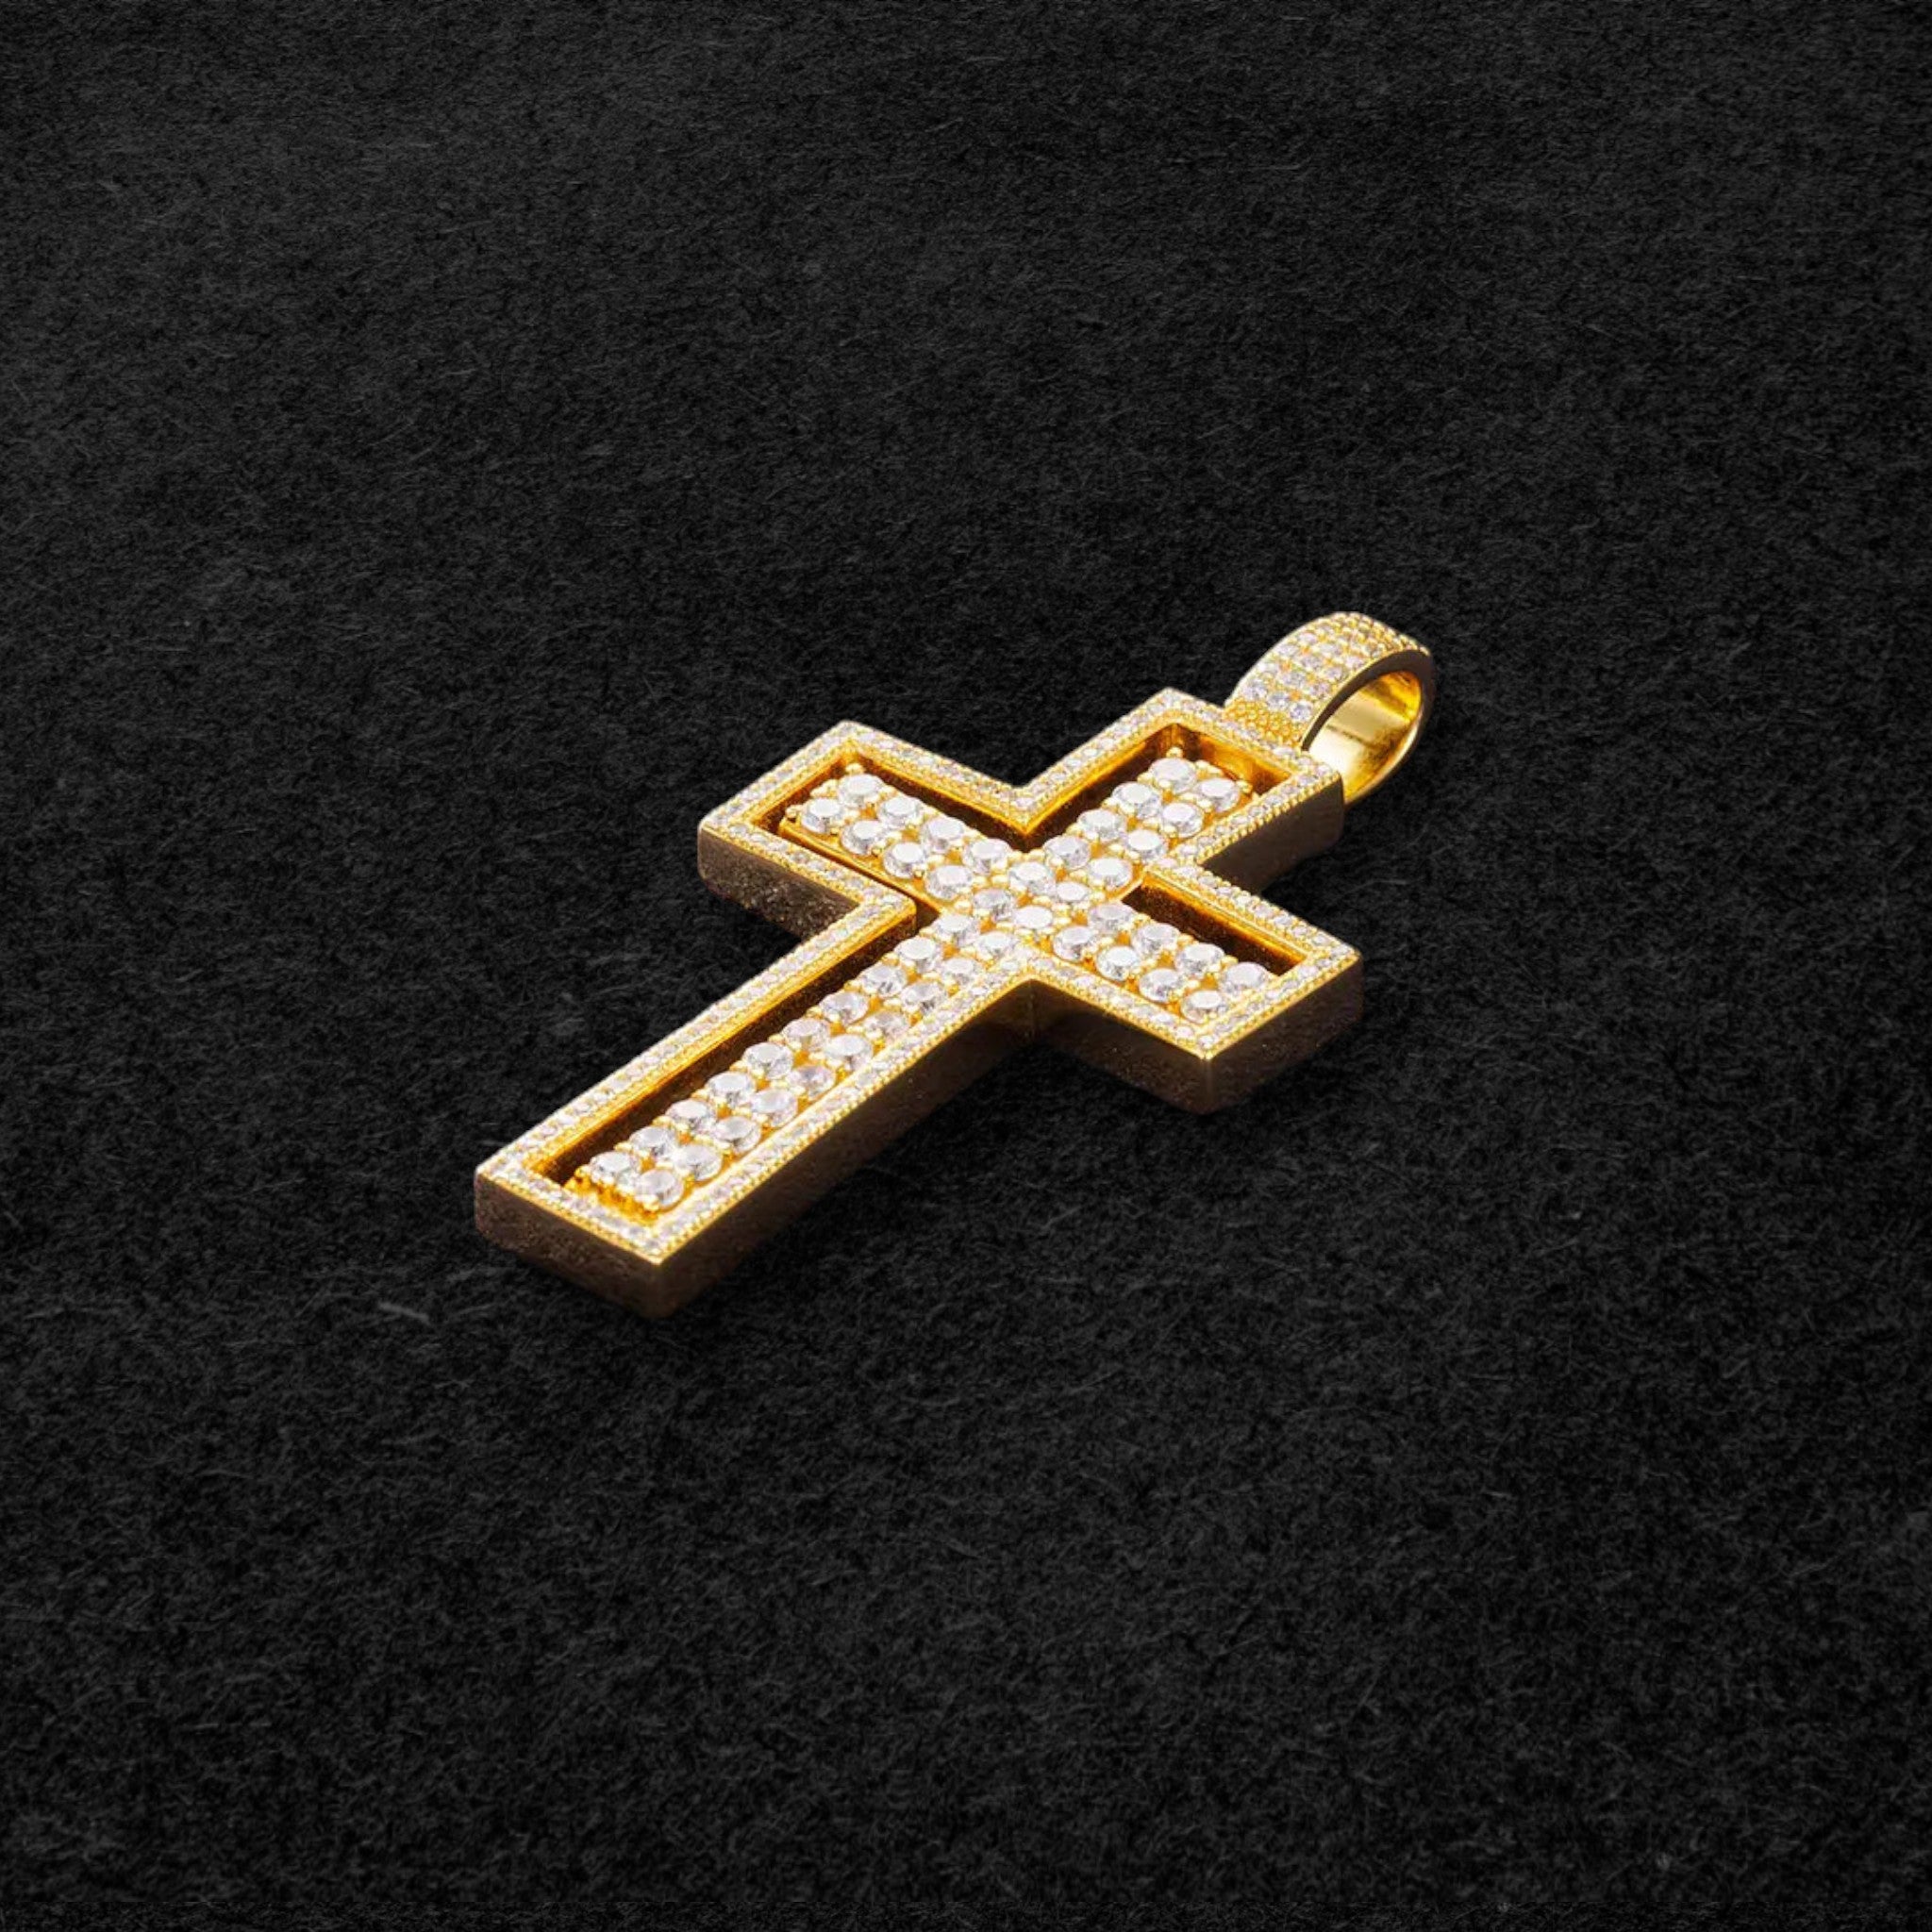 Rotatable Round and Baguette Cross Pendant